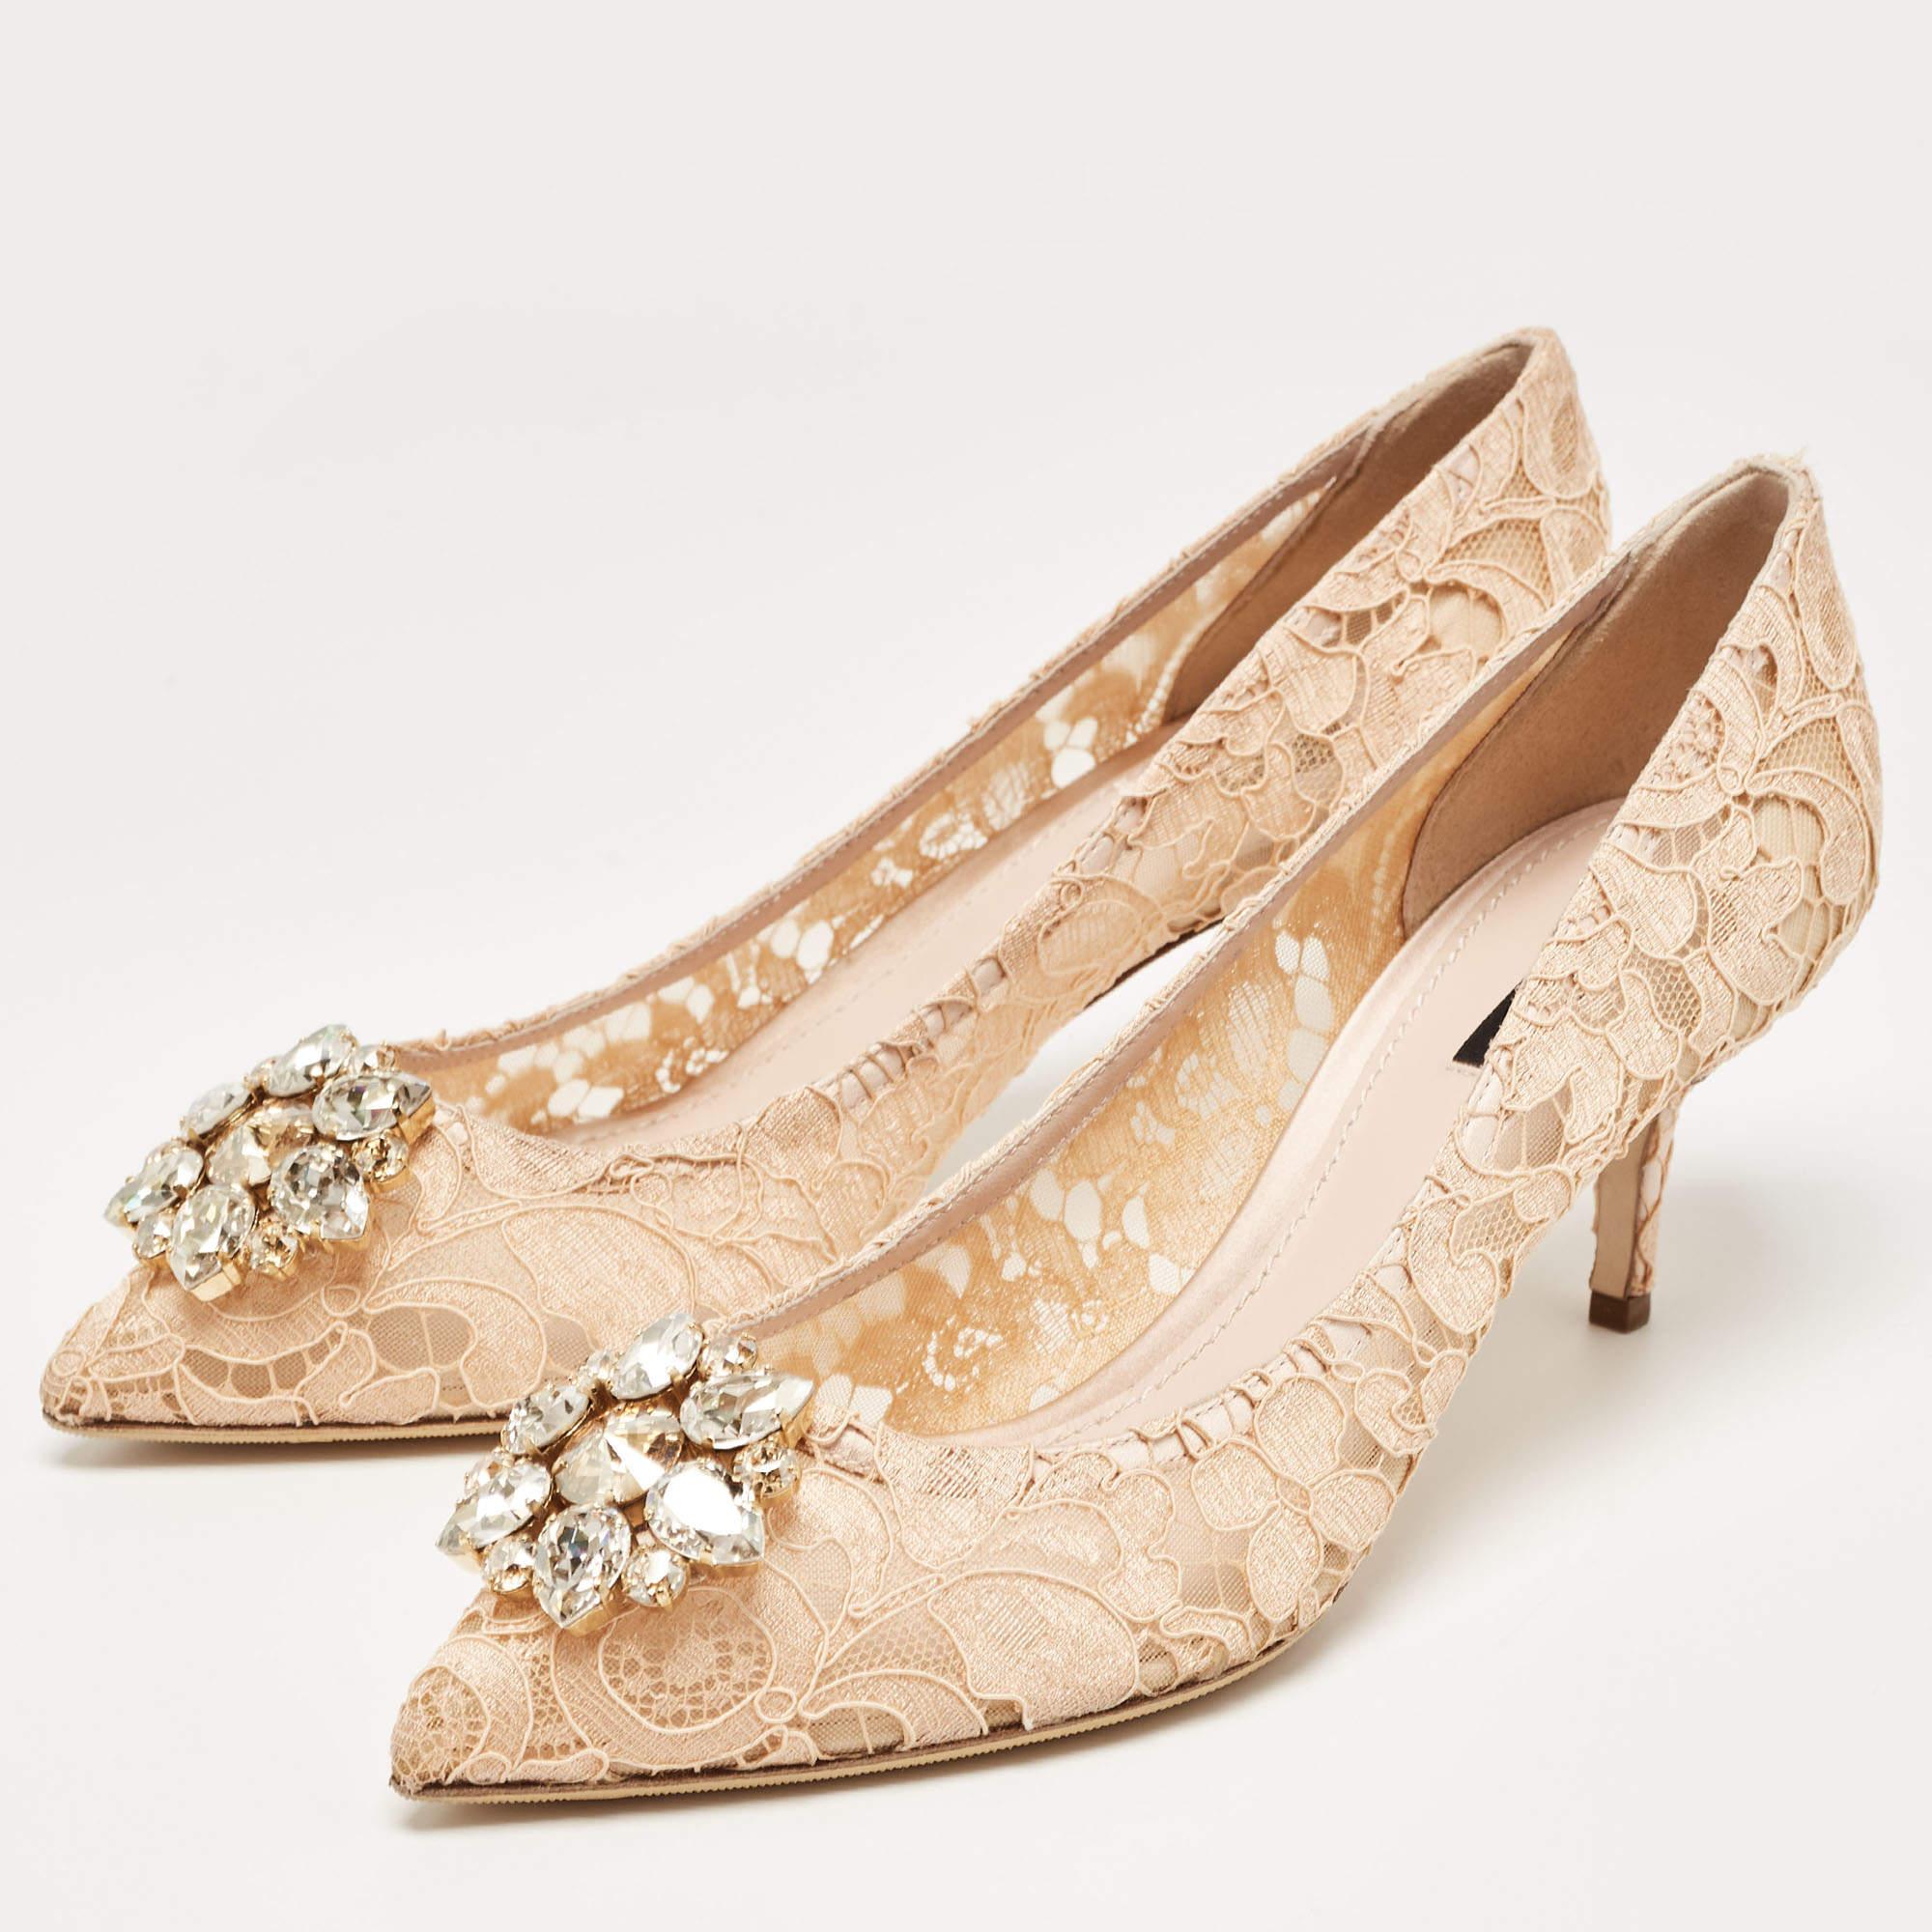 Dolce & Gabbana Peach Lace Bellucci Crystals Pumps Size 41 For Sale 4